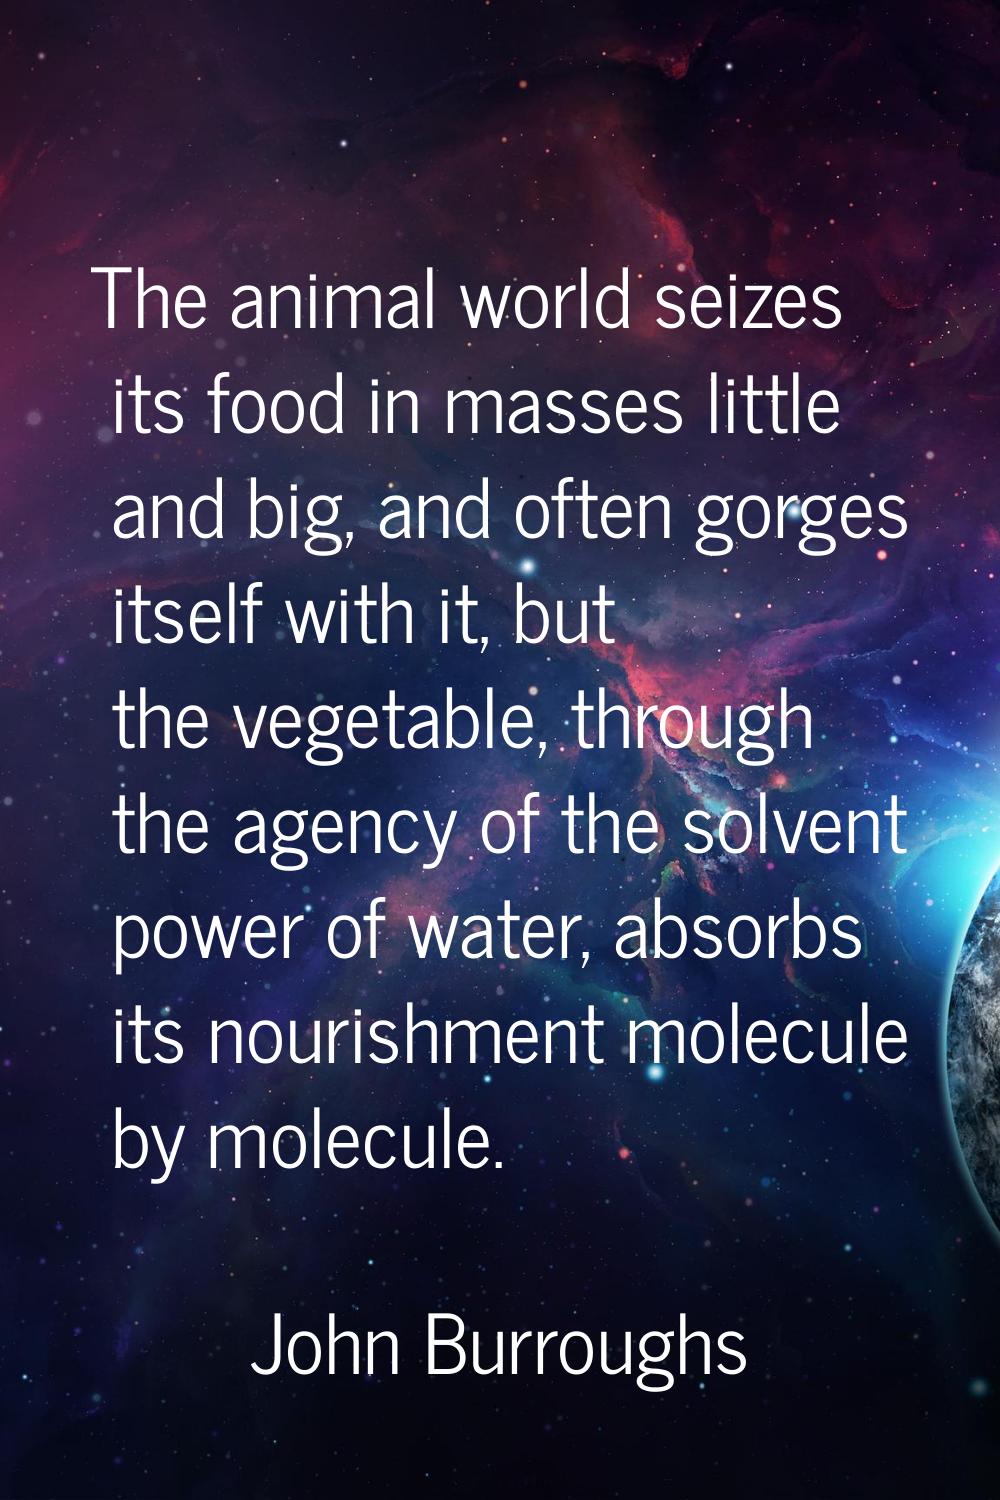 The animal world seizes its food in masses little and big, and often gorges itself with it, but the